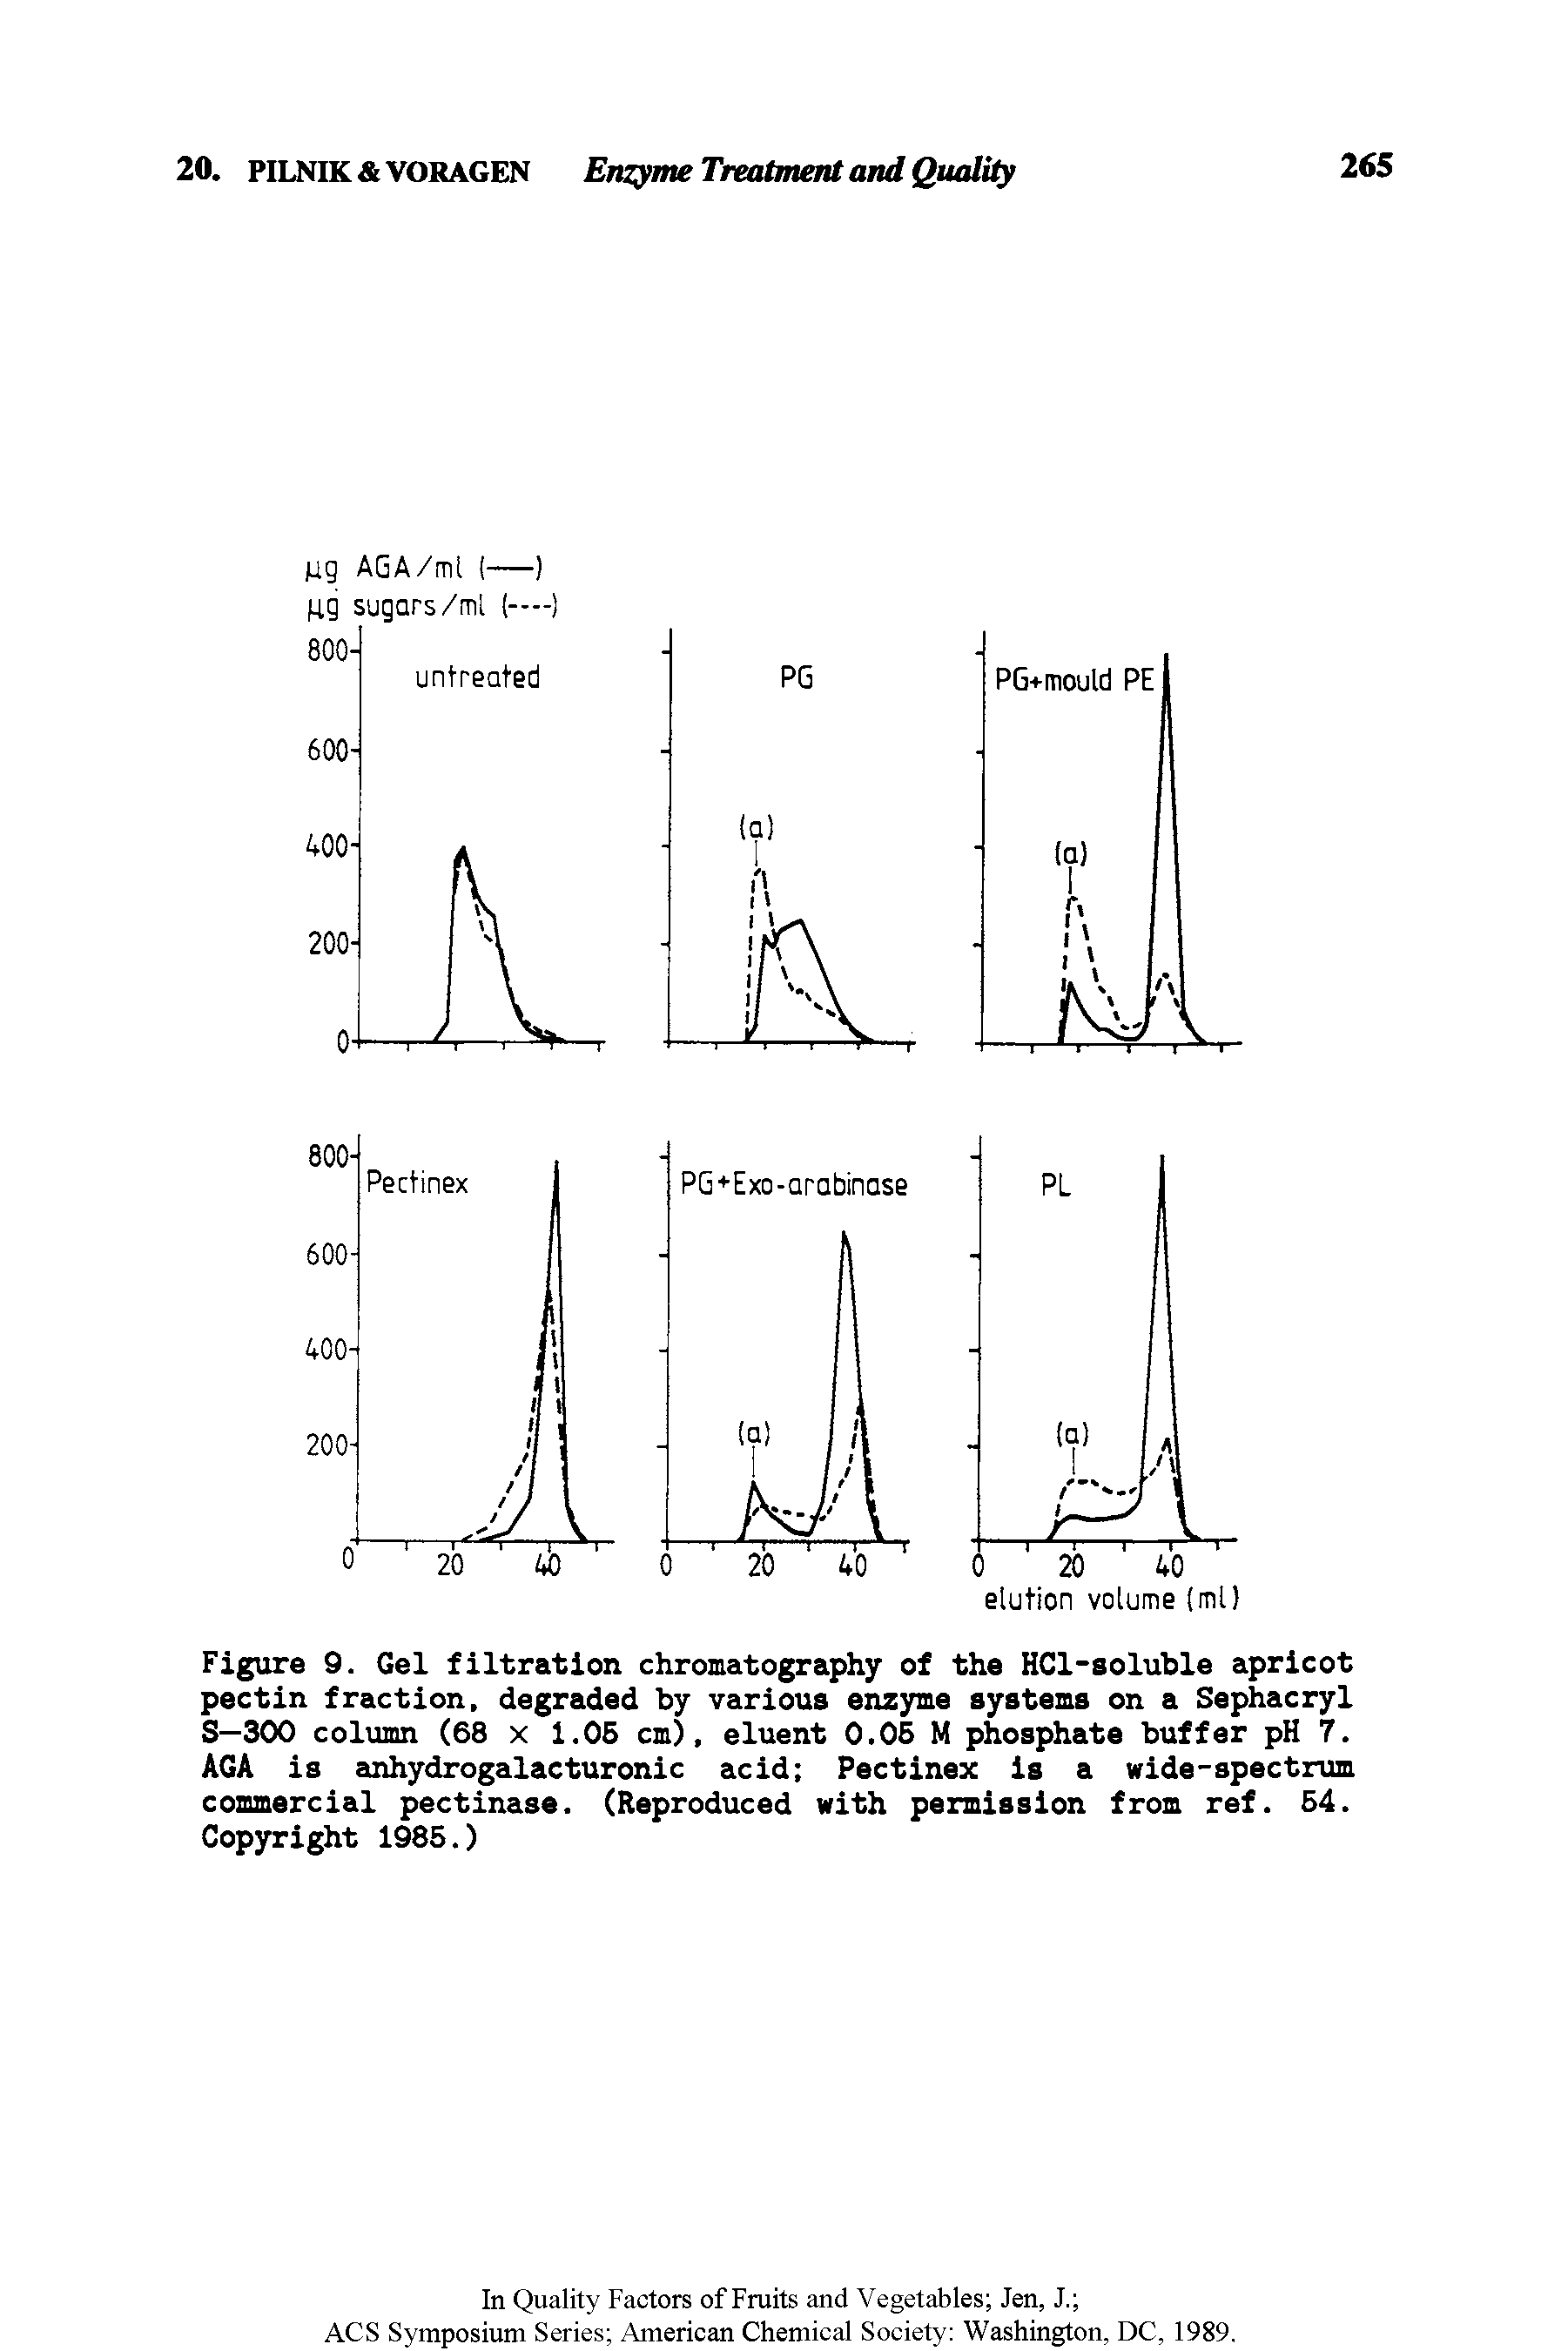 Figure 9. Gel filtration chromatography of the HCl-soluble apricot pectin fraction, degraded by various enzyme systems on a Sephacryl S—300 column (68 x 1.05 cm), eluent 0.05 M phosphate buffer pH 7. AGA is anhydrogalacturonic acid Pectinex is a wide-spectrum commercial pectinase. (Reproduced with permission from ref. 54. Copyright 1985.)...